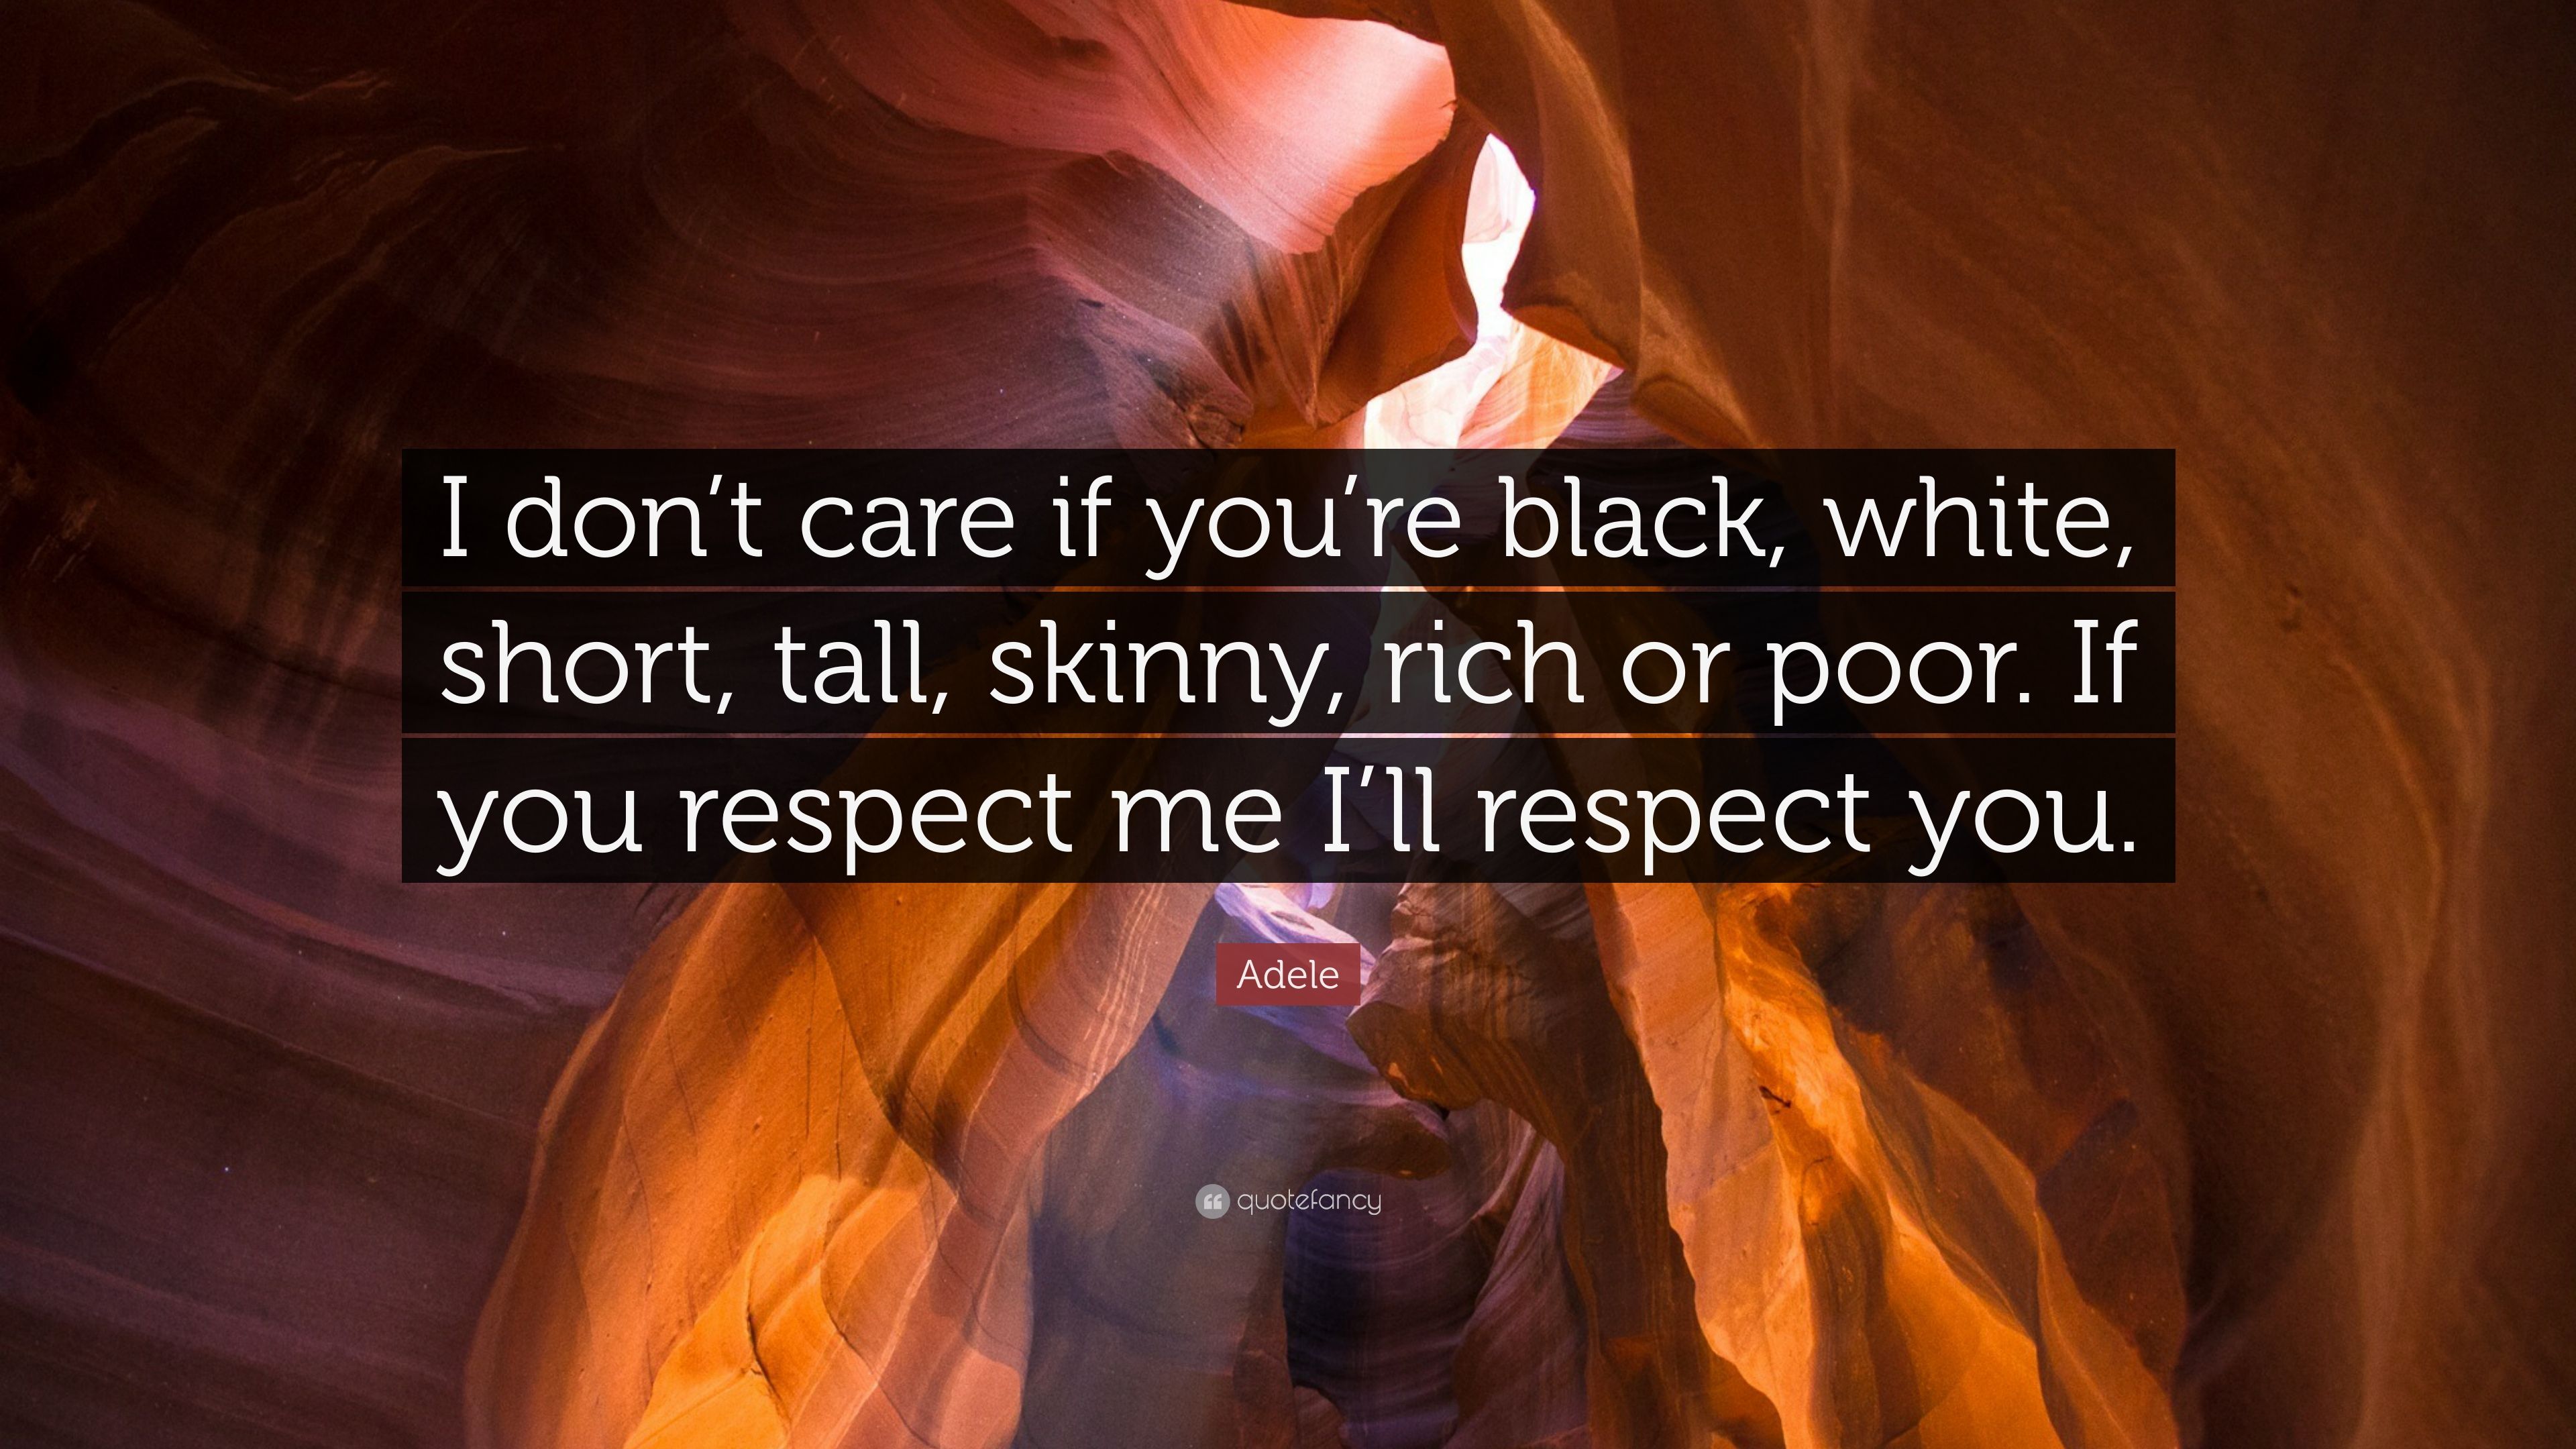 Adele Quote: “I don't care if you're black, white, short, tall, skinny, rich or poor. If you respect me I'll respect you.” (12 wallpaper)